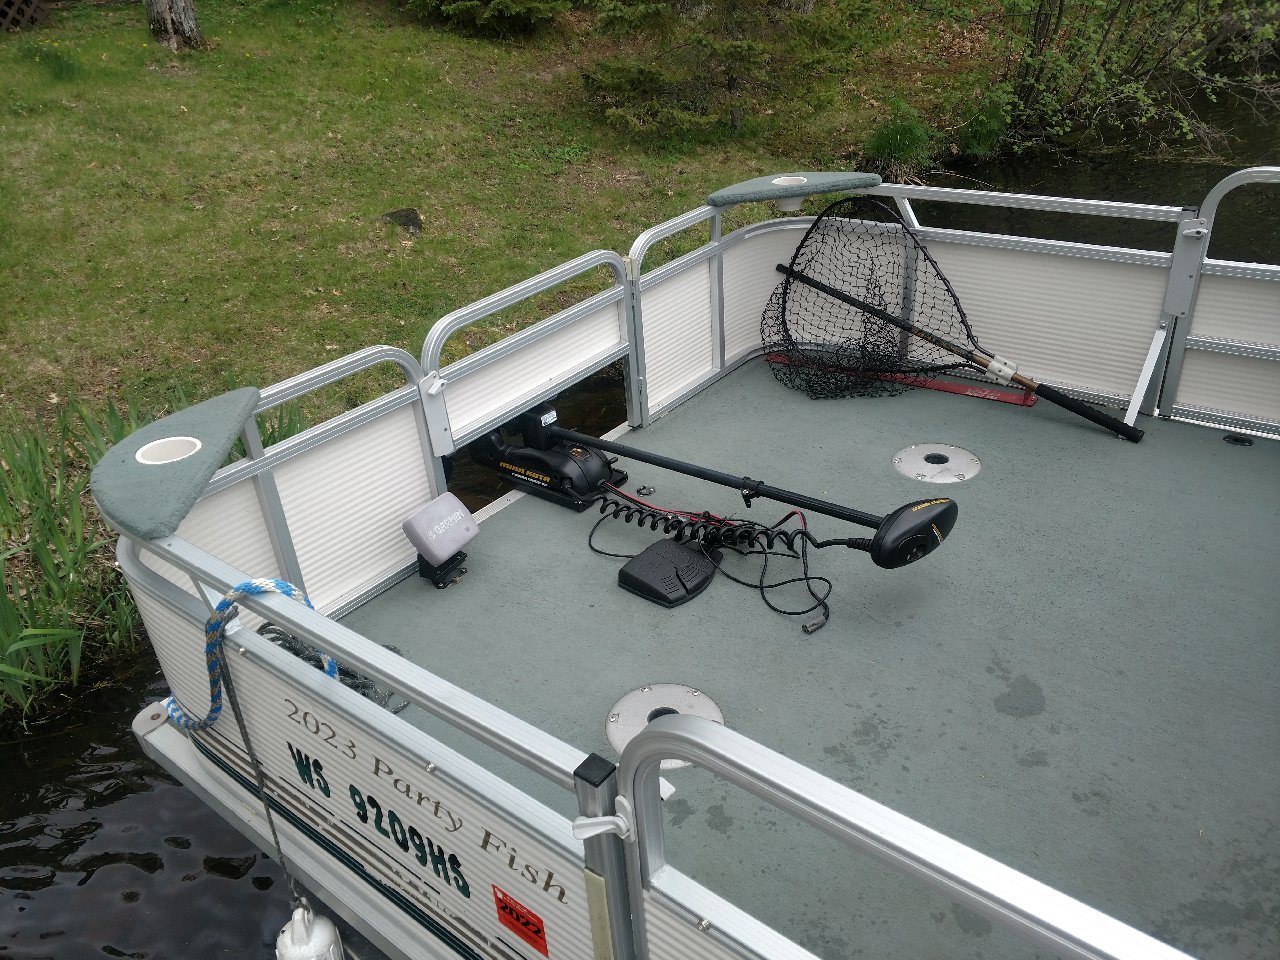 Trolling motor on pontoon - General Discussion Forum - General Discussion  Forum